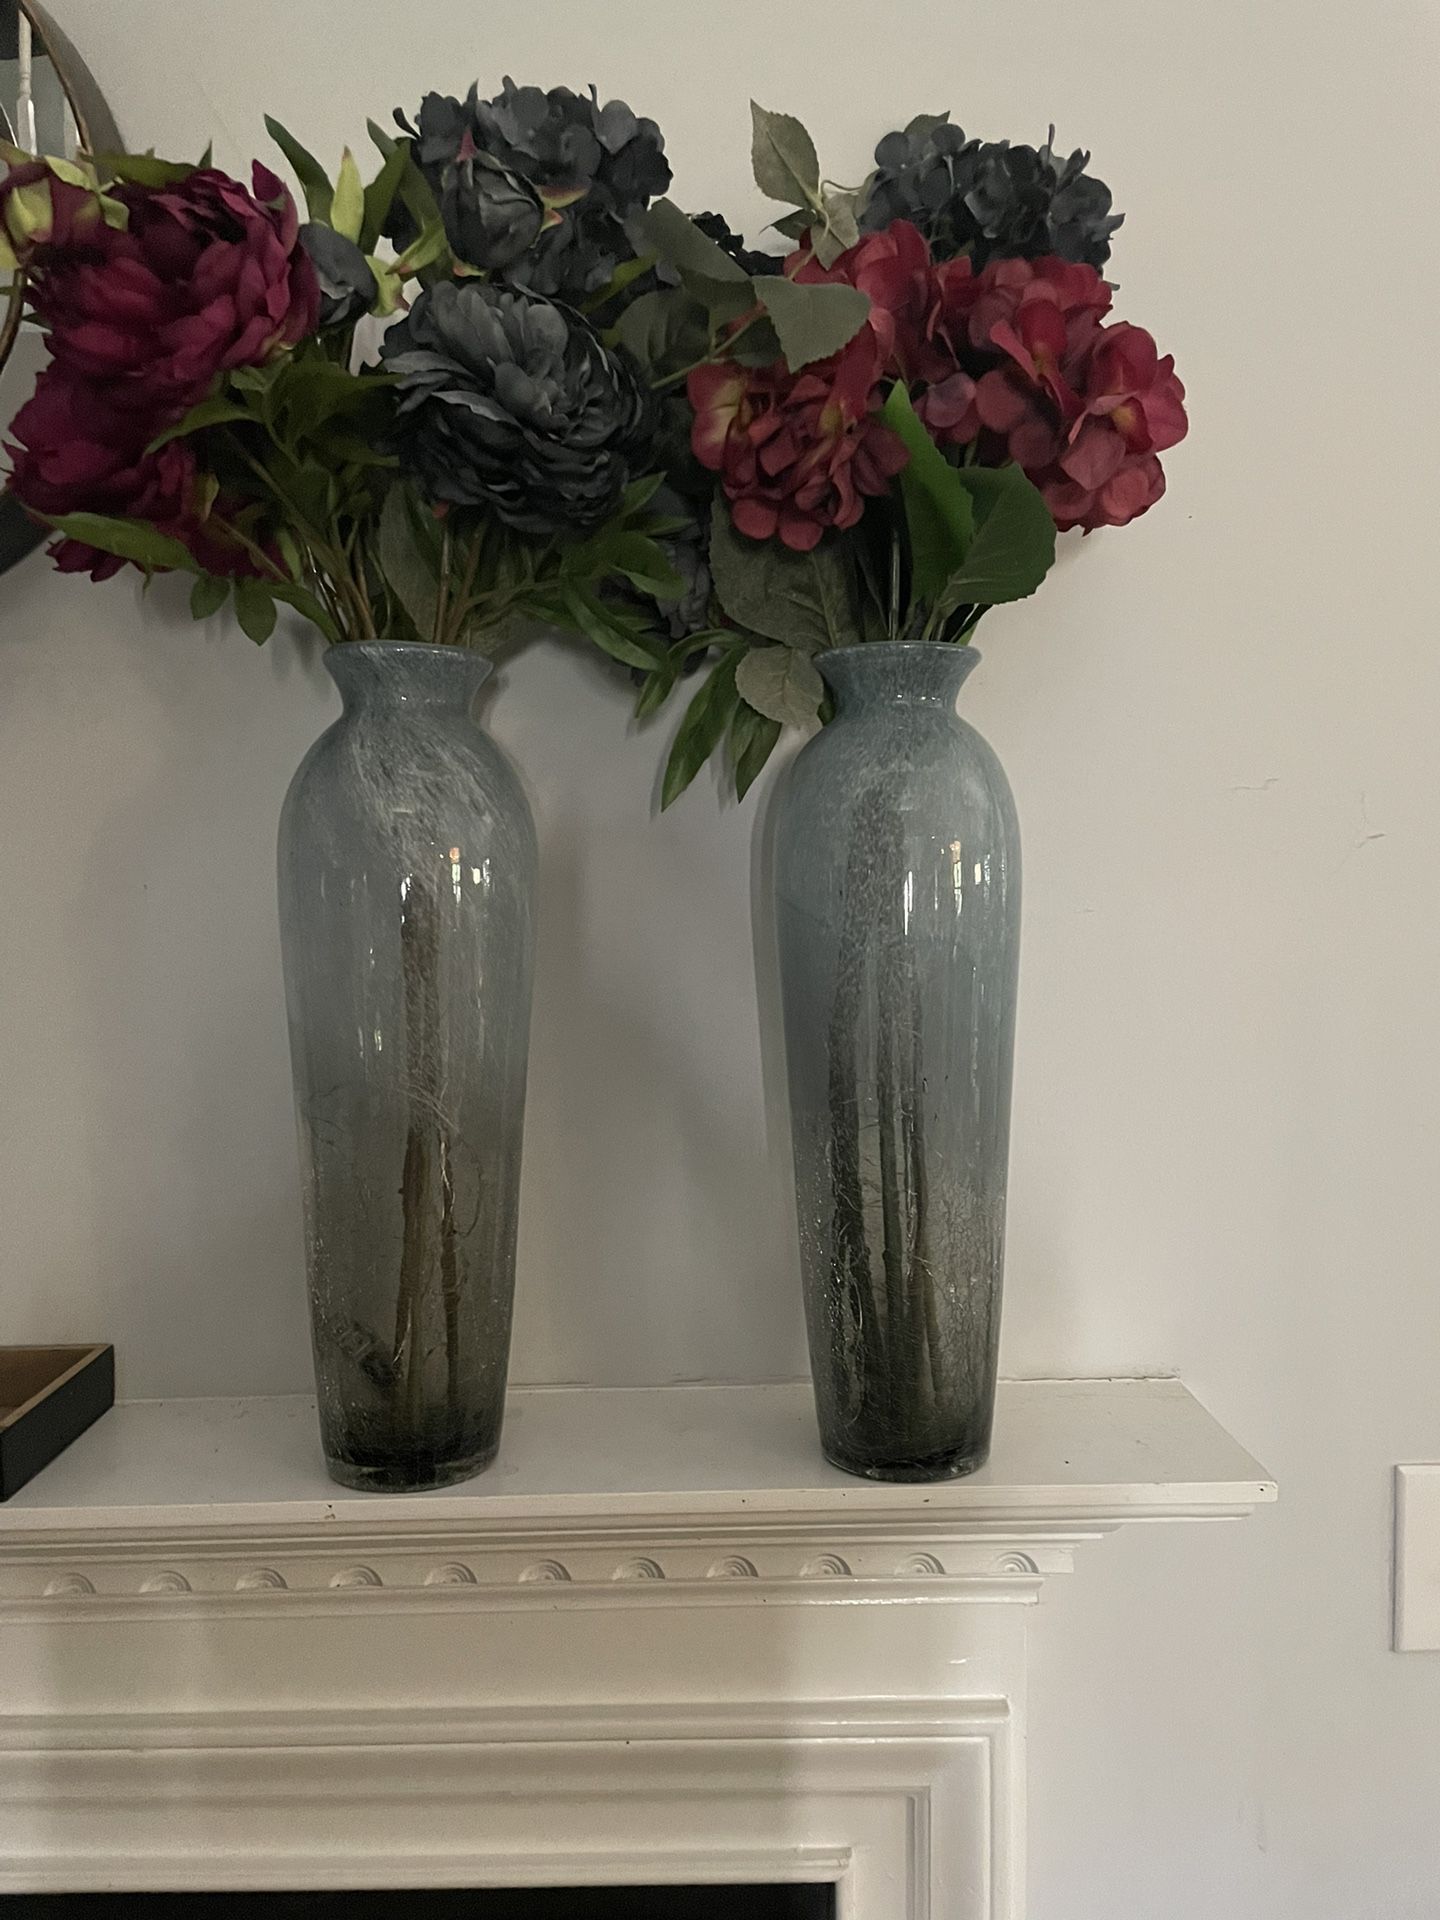 18” Vases With Flowers